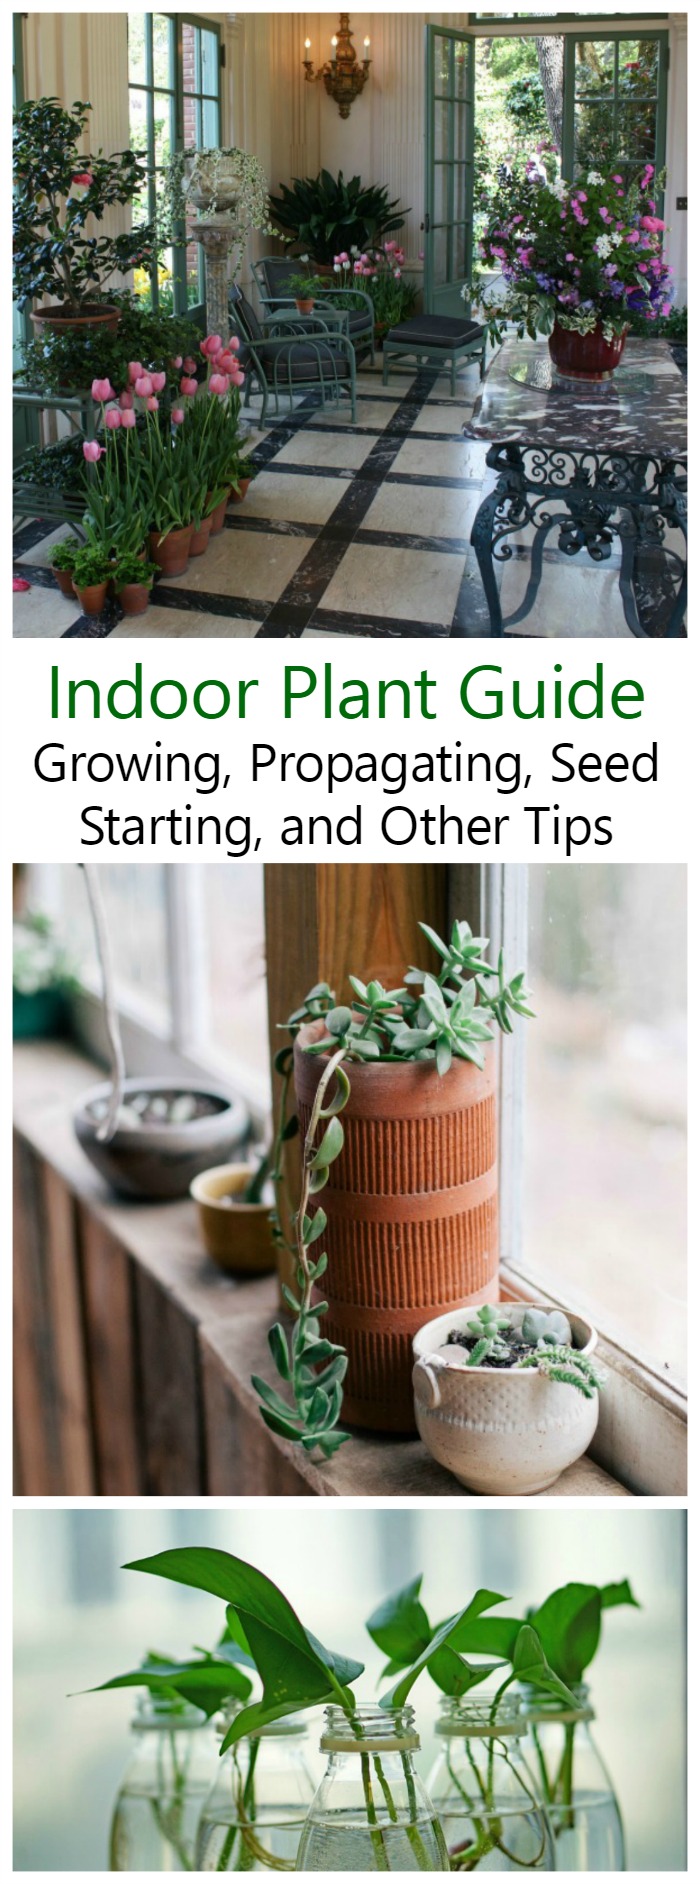 Growing Indoor Plants brings nature indoors. This guide gives you tons of information for choosing, growing, propagating and displaying your indoor plants. Get all your indoor plant information in one place.